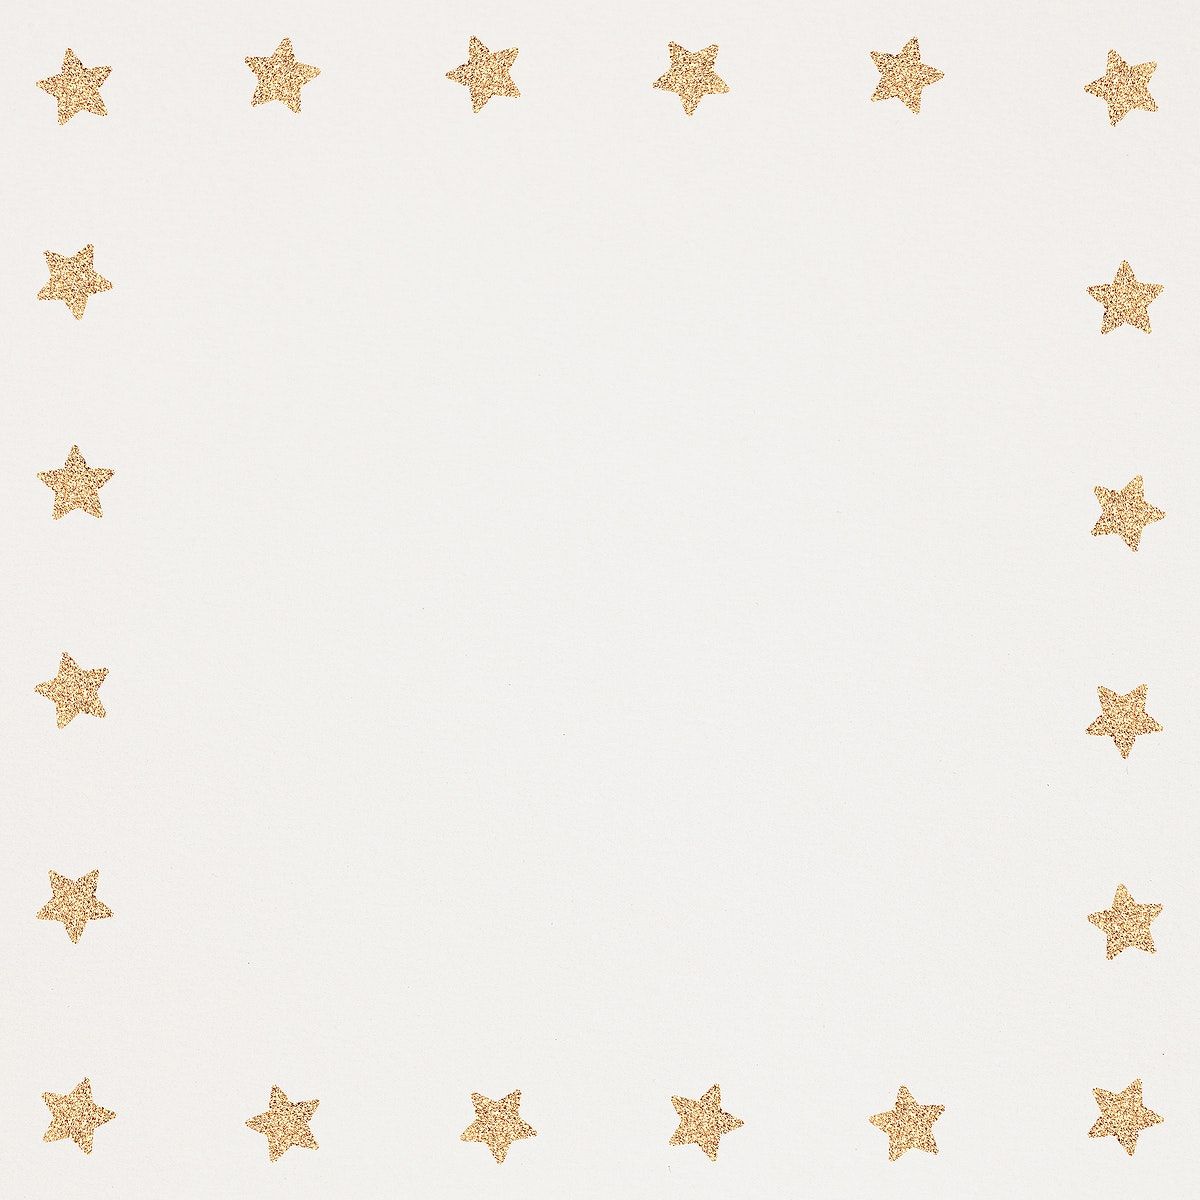 Gold Star Patterned Frame On A Beige Background Image By